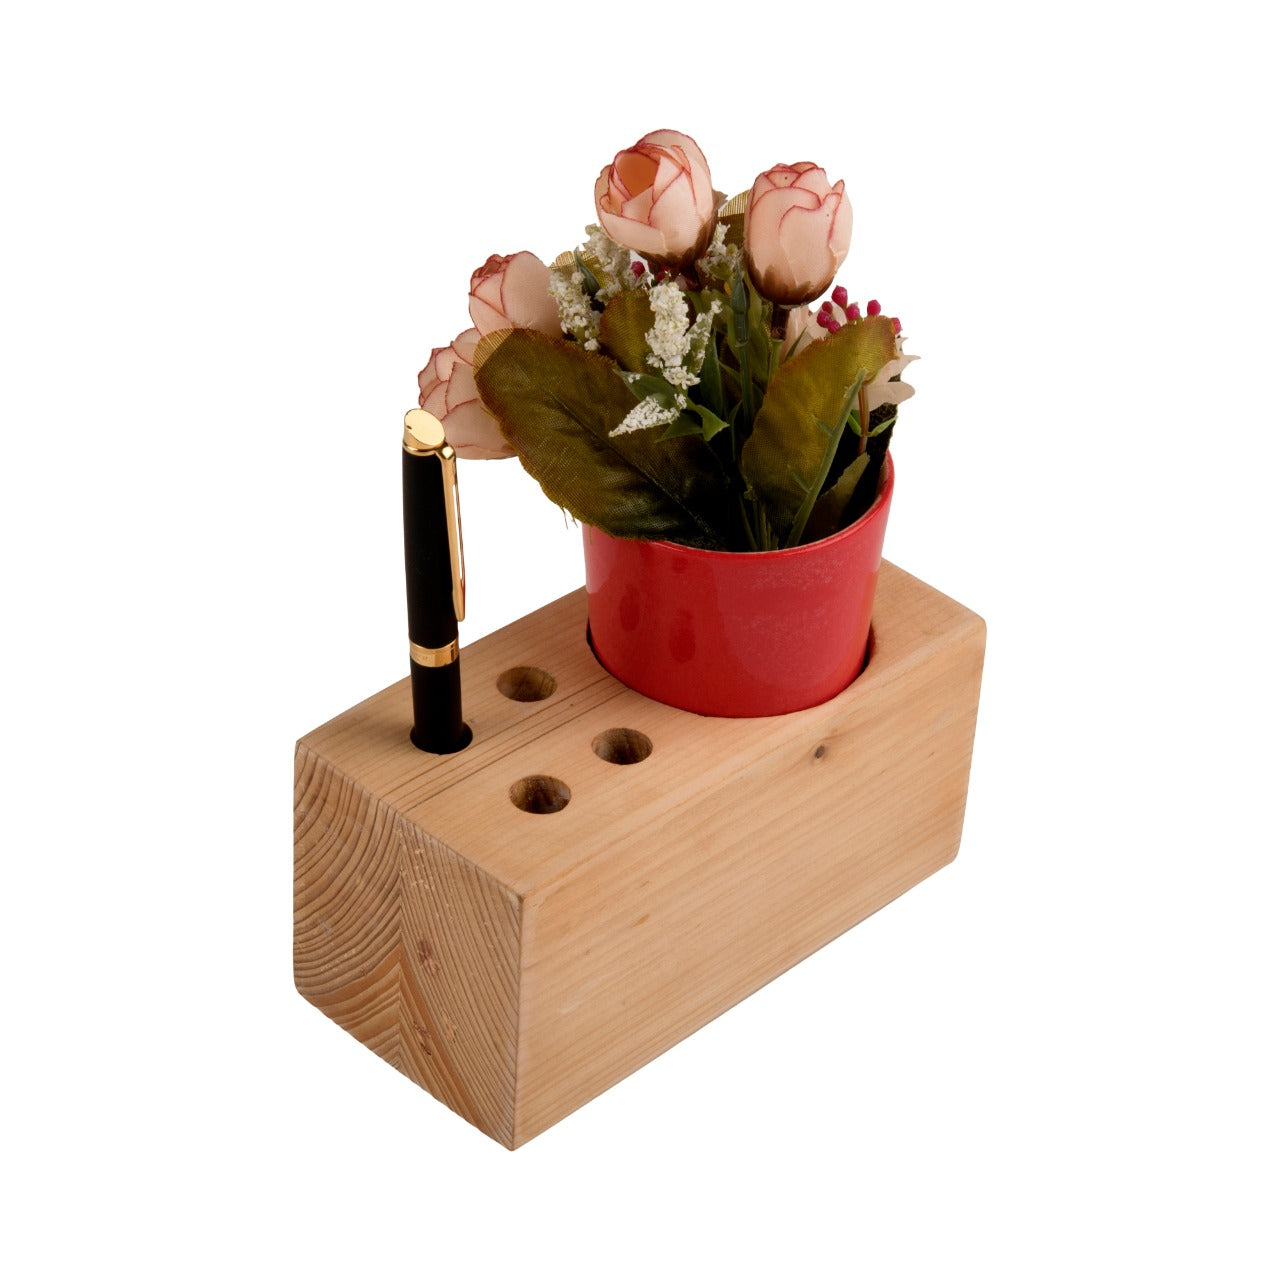 A Tiny Mistake Desk and Pen Stand Planter, Indoor Planter for Home Decor, Perfect for Work from Home Desk